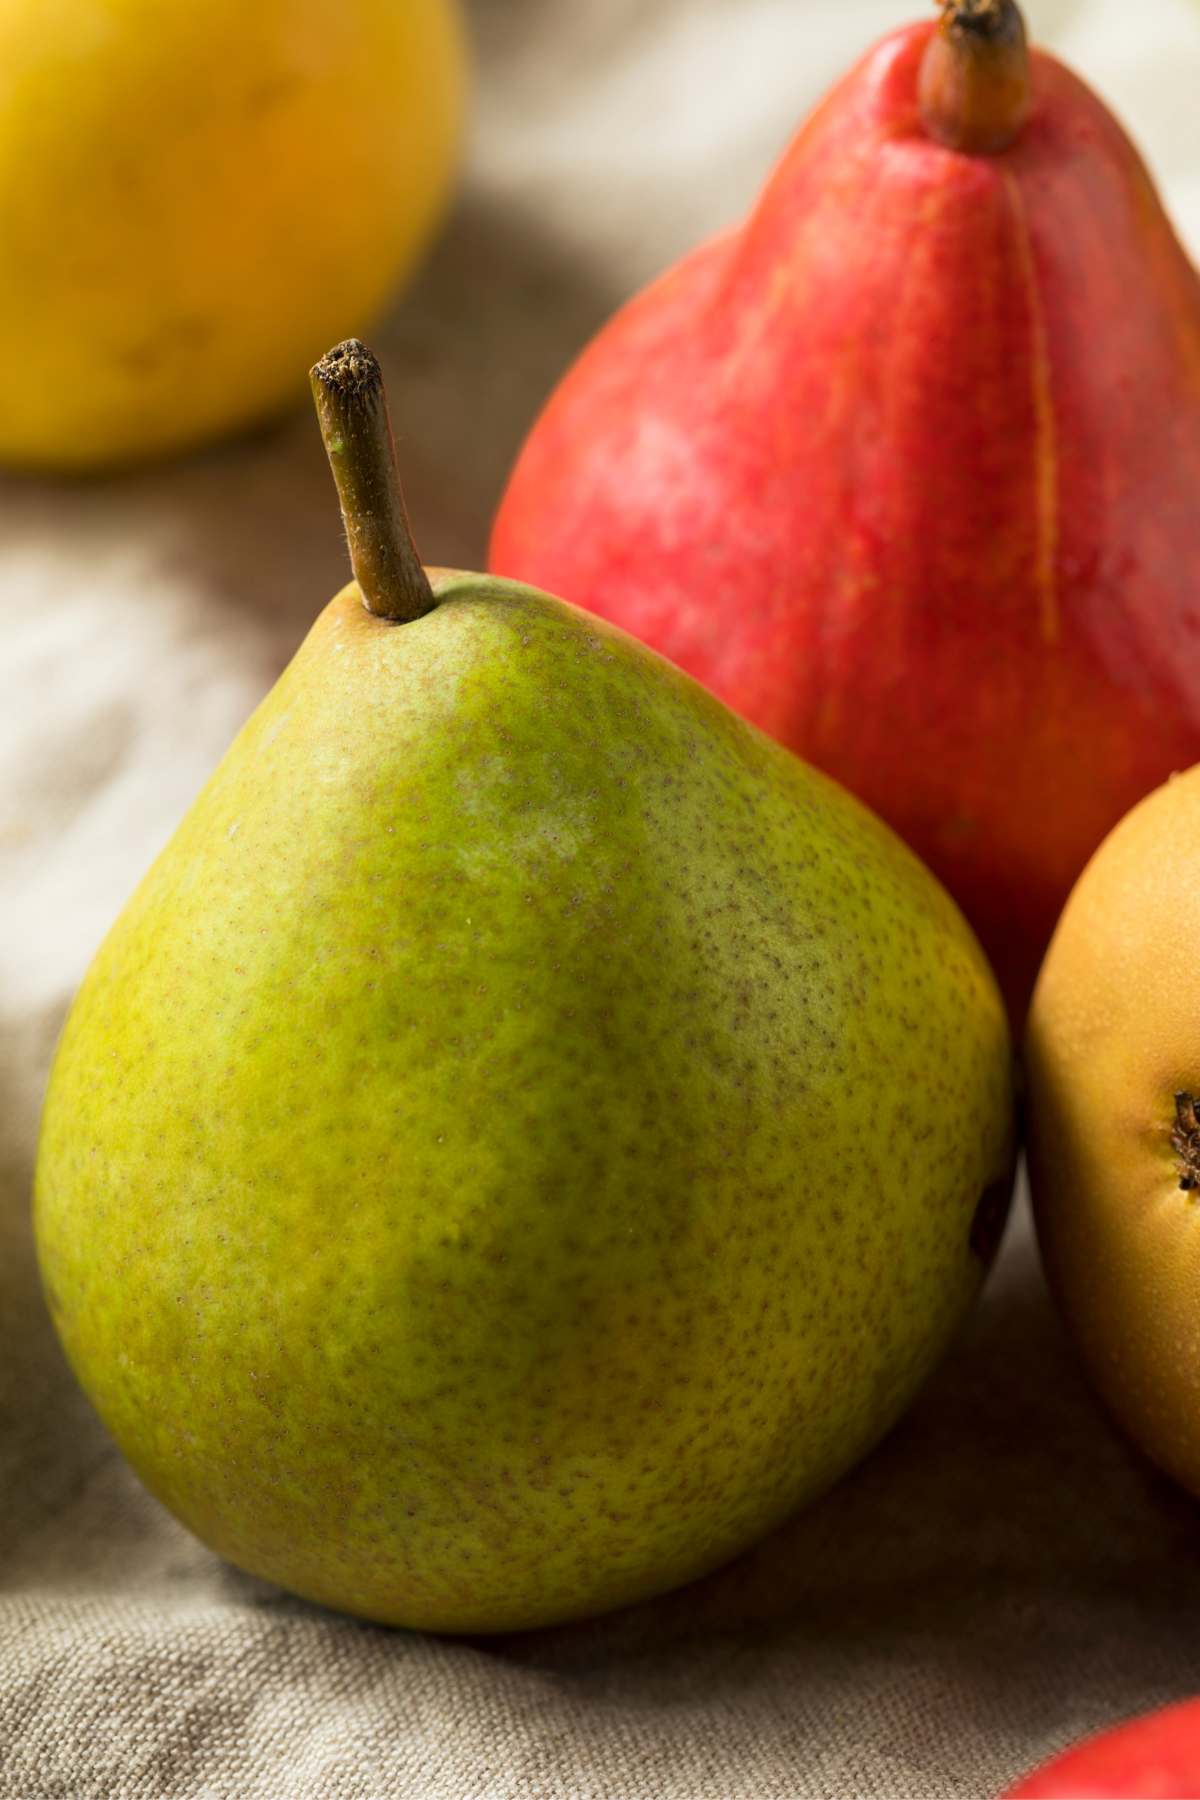 Are pears keto-friendly? How many carbs are in pears? When following a keto diet, it's important to keep track of your carbohydrate intake, as too many carbs can kick you out of ketosis. In this post, we'll explore whether pears are keto-friendly and take a closer look at the carbs in pears.